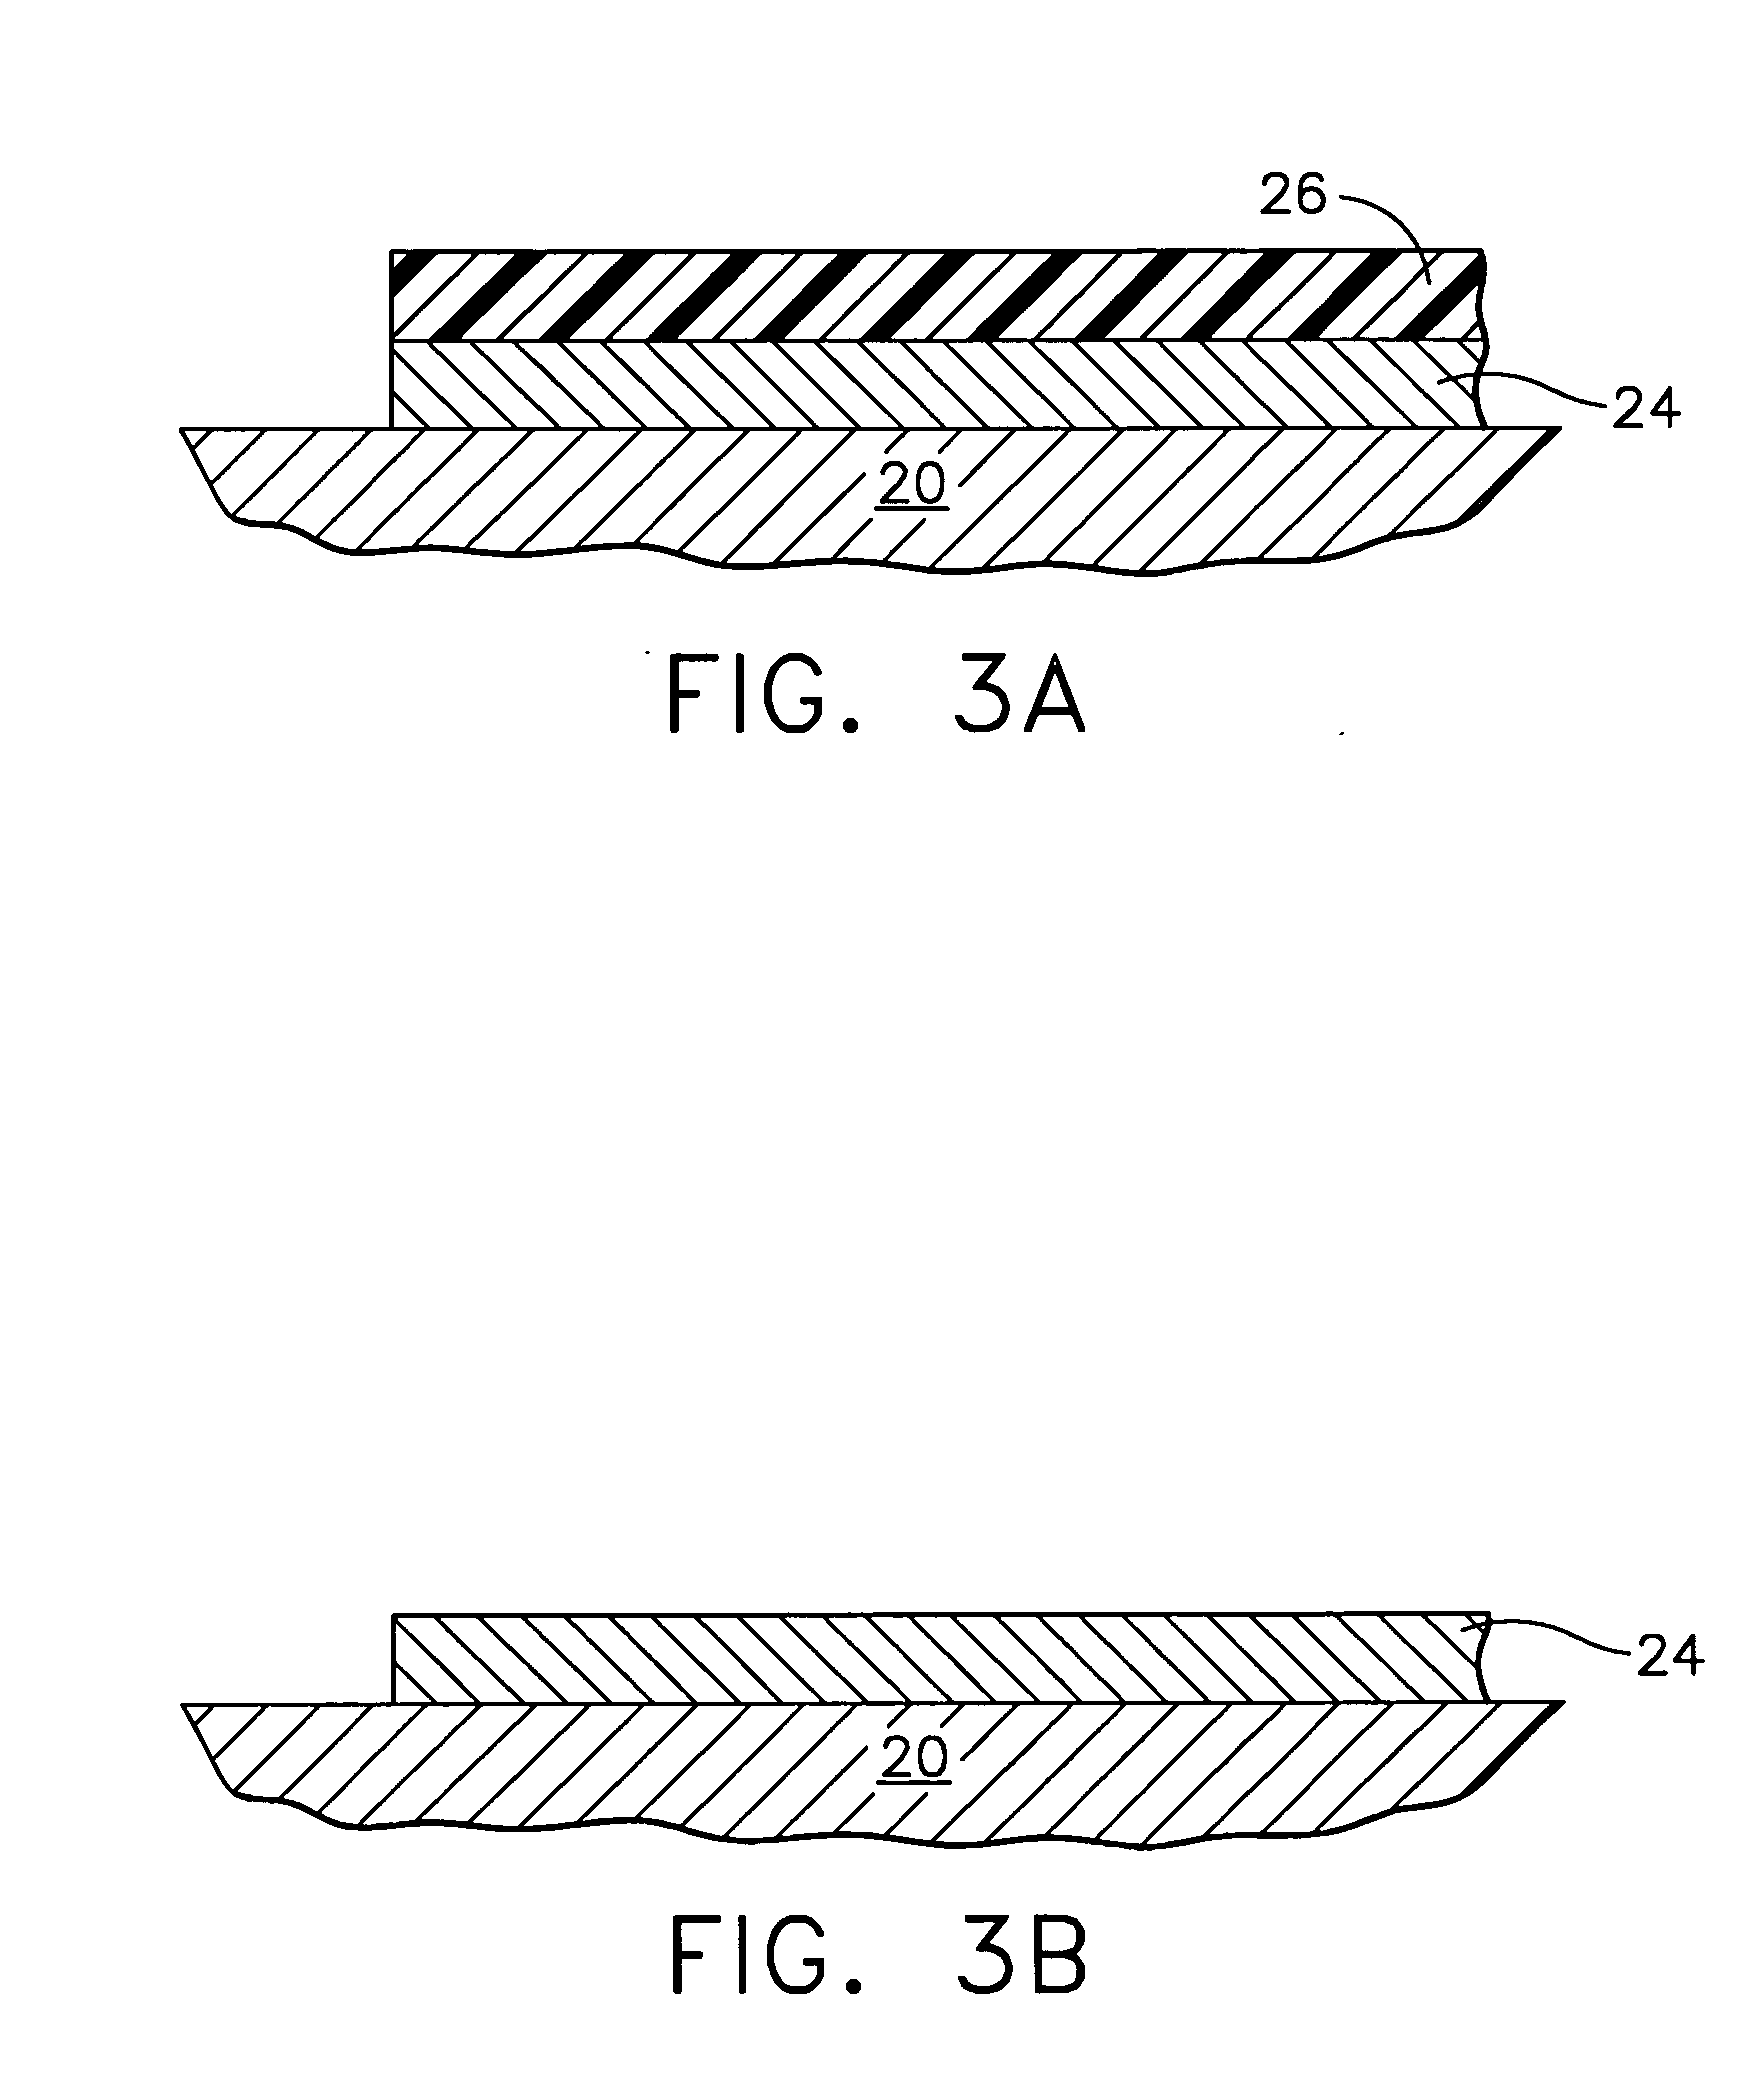 Two-wire layered heater system